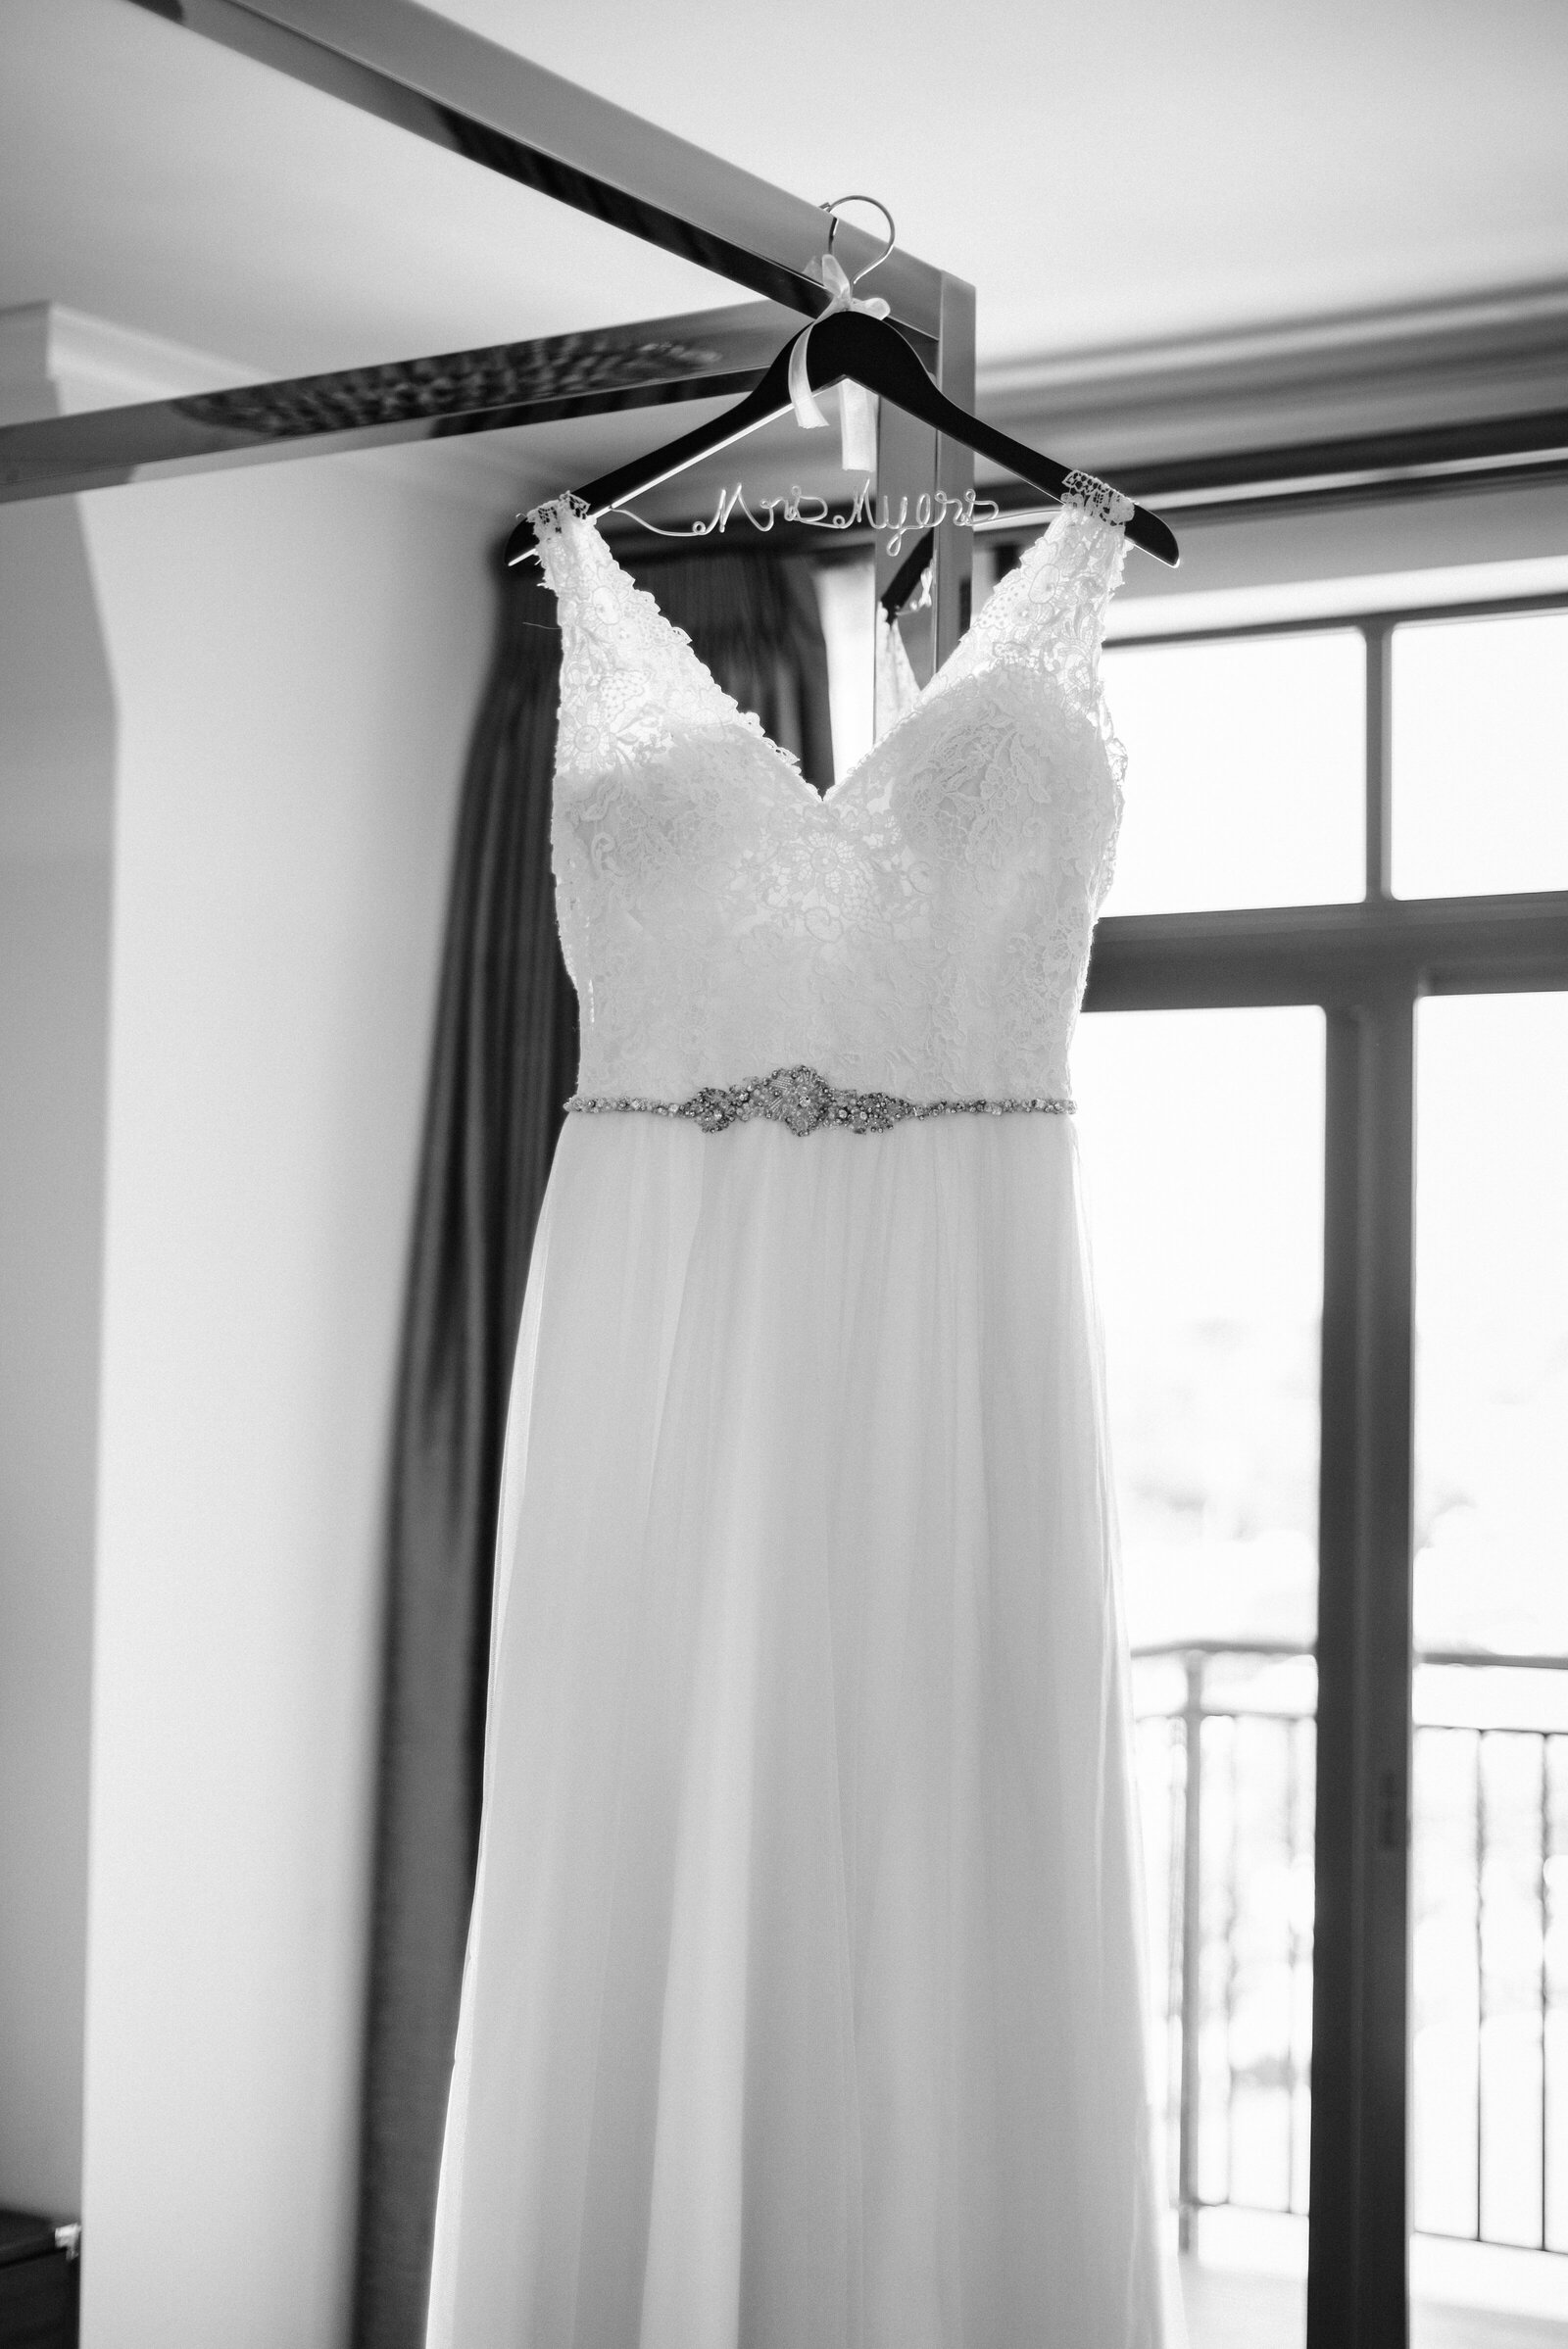 black and white image of a dress hanging in front of a window